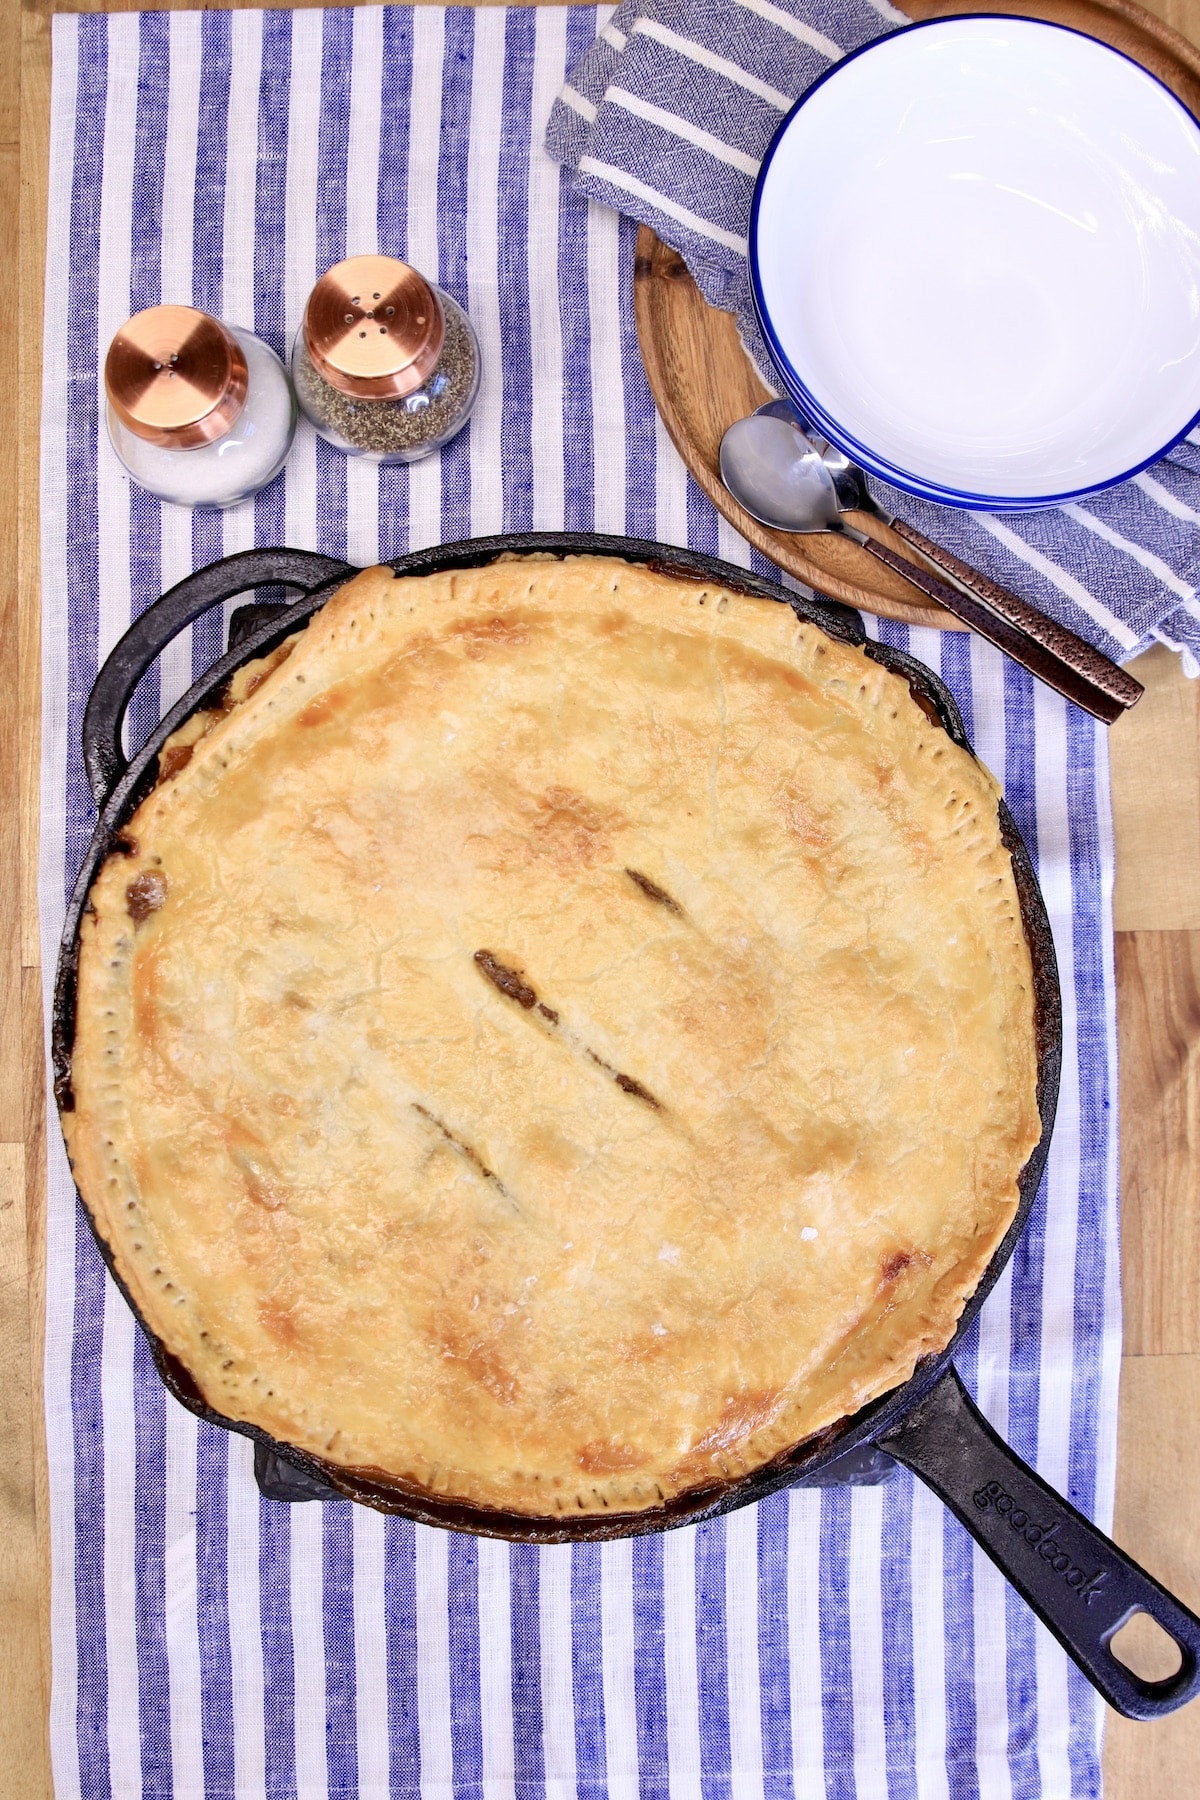 Skillet pot pie on a striped table cloth, plates on the side.